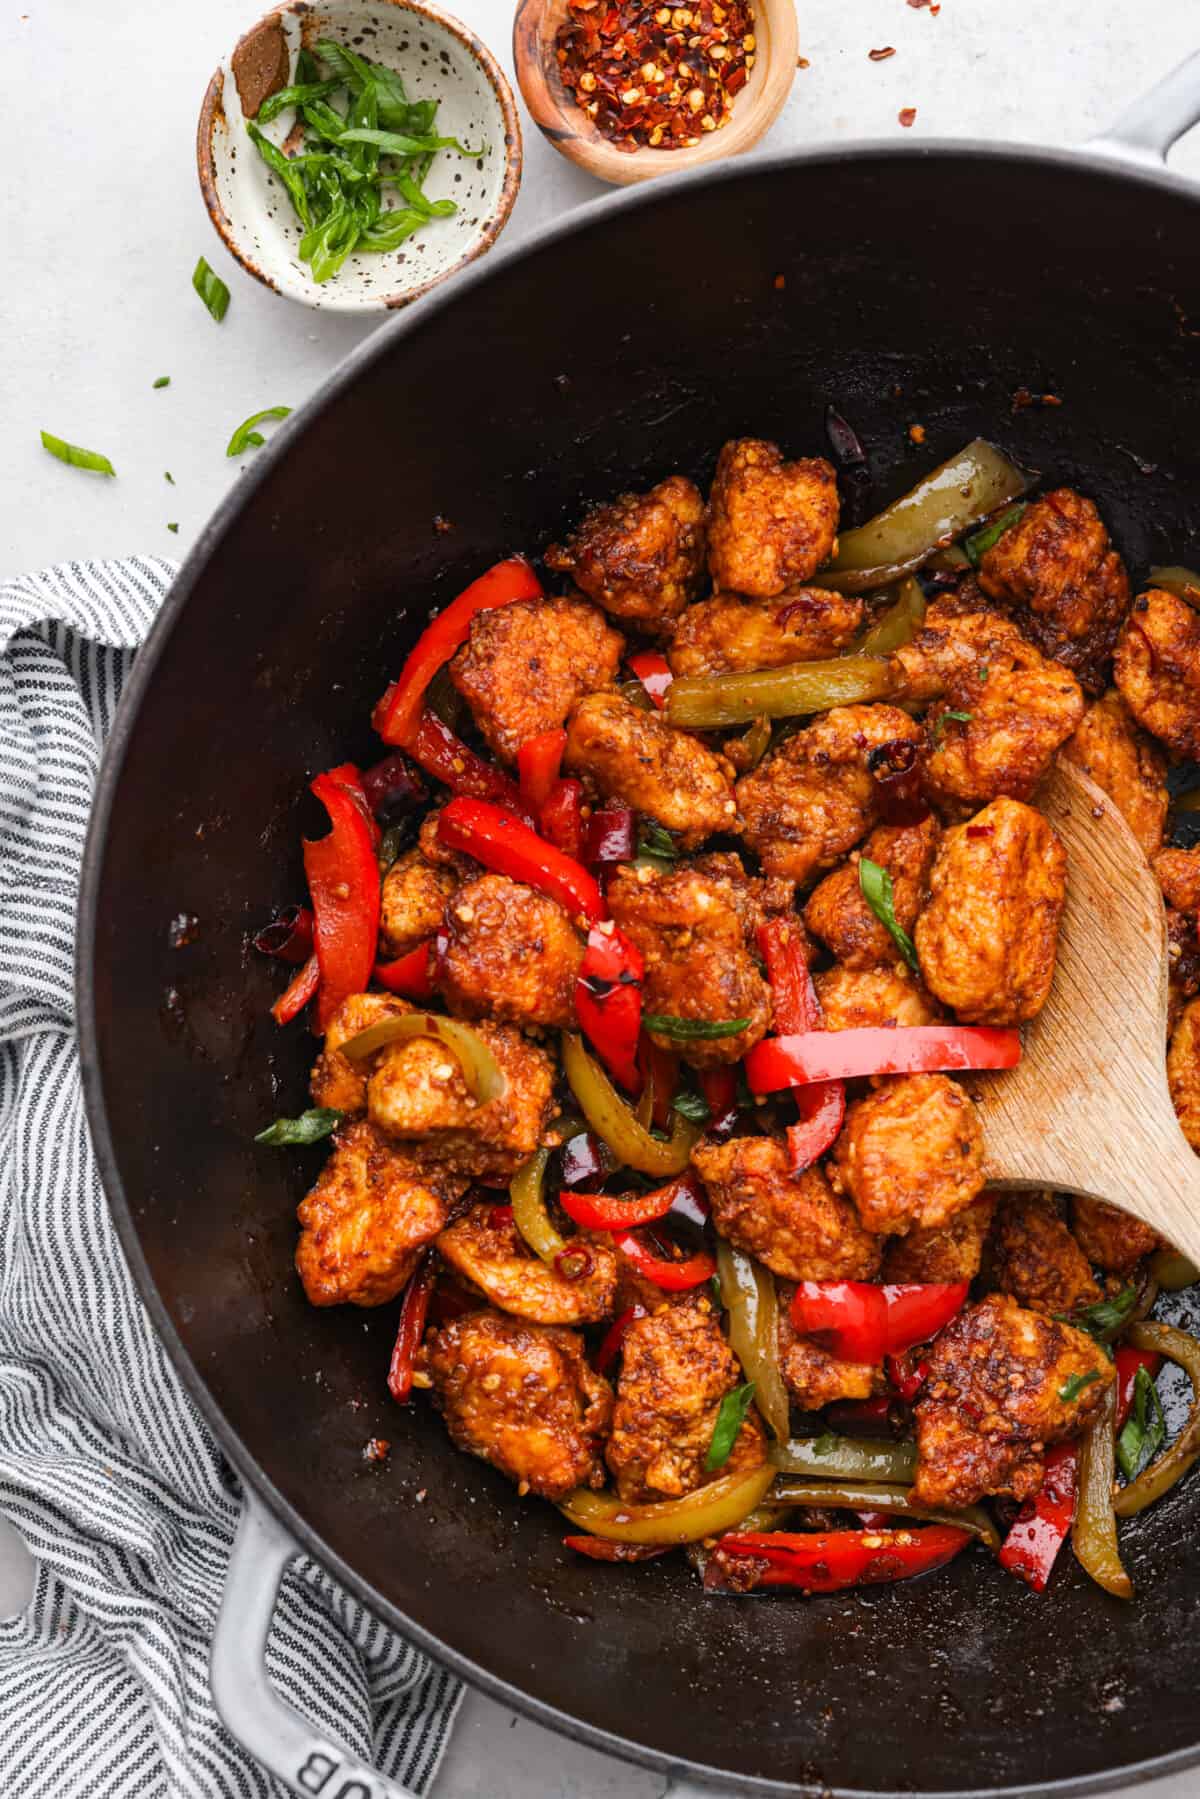 Cooked kung pao chicken with bell peppers in a black wok.